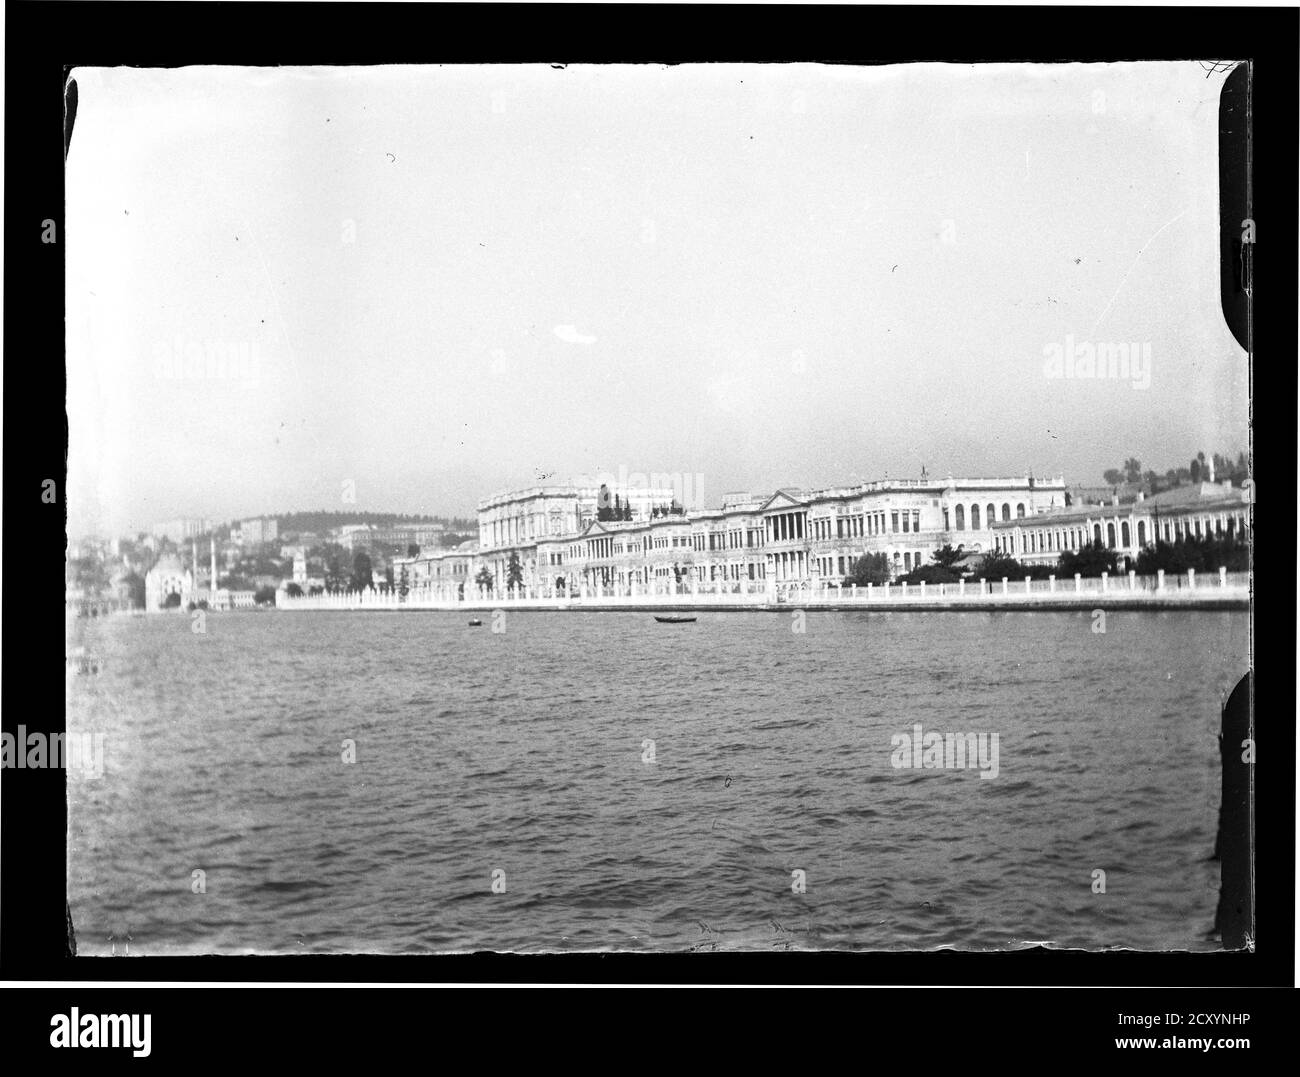 Turkey Istanbul Golden Horn Dolmabahçe Palace. Dolmabahçe Palace (Turkish: Dolmabahçe Sarayı) located in the Beşiktaş district of Istanbul, Turkey, on the European coast of the Strait of Istanbul, served as the main administrative center of the Ottoman Empire from 1856 to 1887 and from 1909 to 1922 (Yıldız Palace was used in the interim period). Photograph on dry glass plate from the Herry W. Schaefer collection, around 1910. Stock Photo